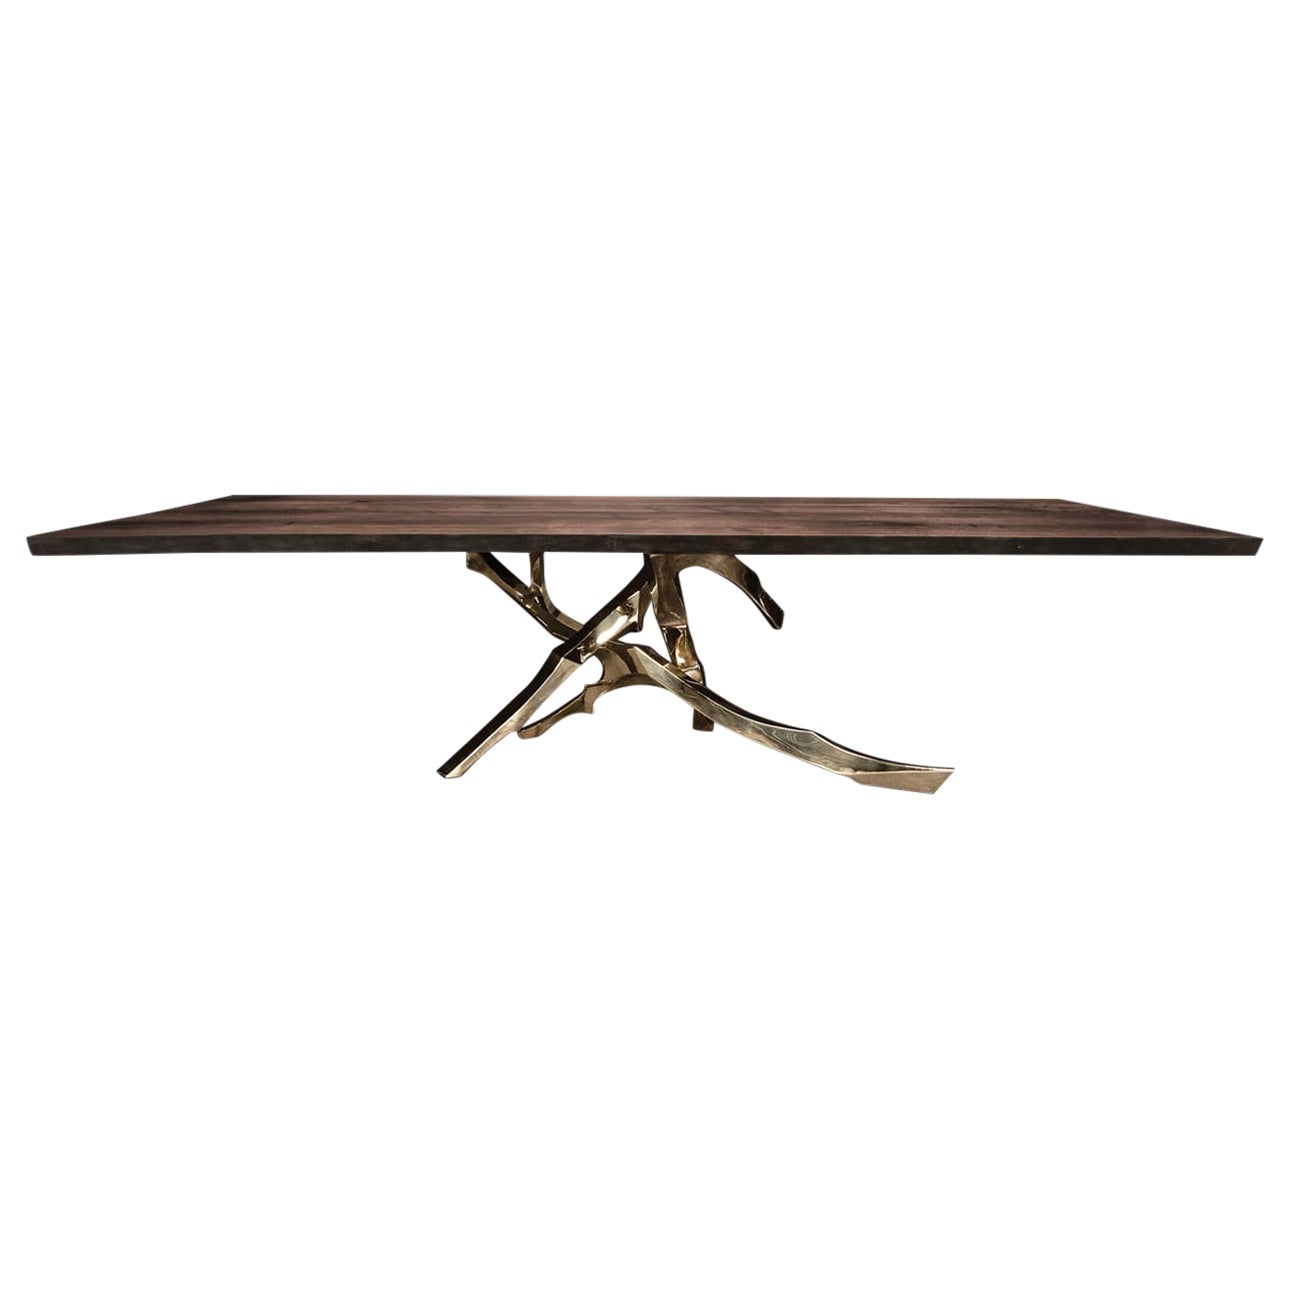 Seamed Grolier Table: Cast Bronze Table Inspired by Nature’s Organic Branches For Sale